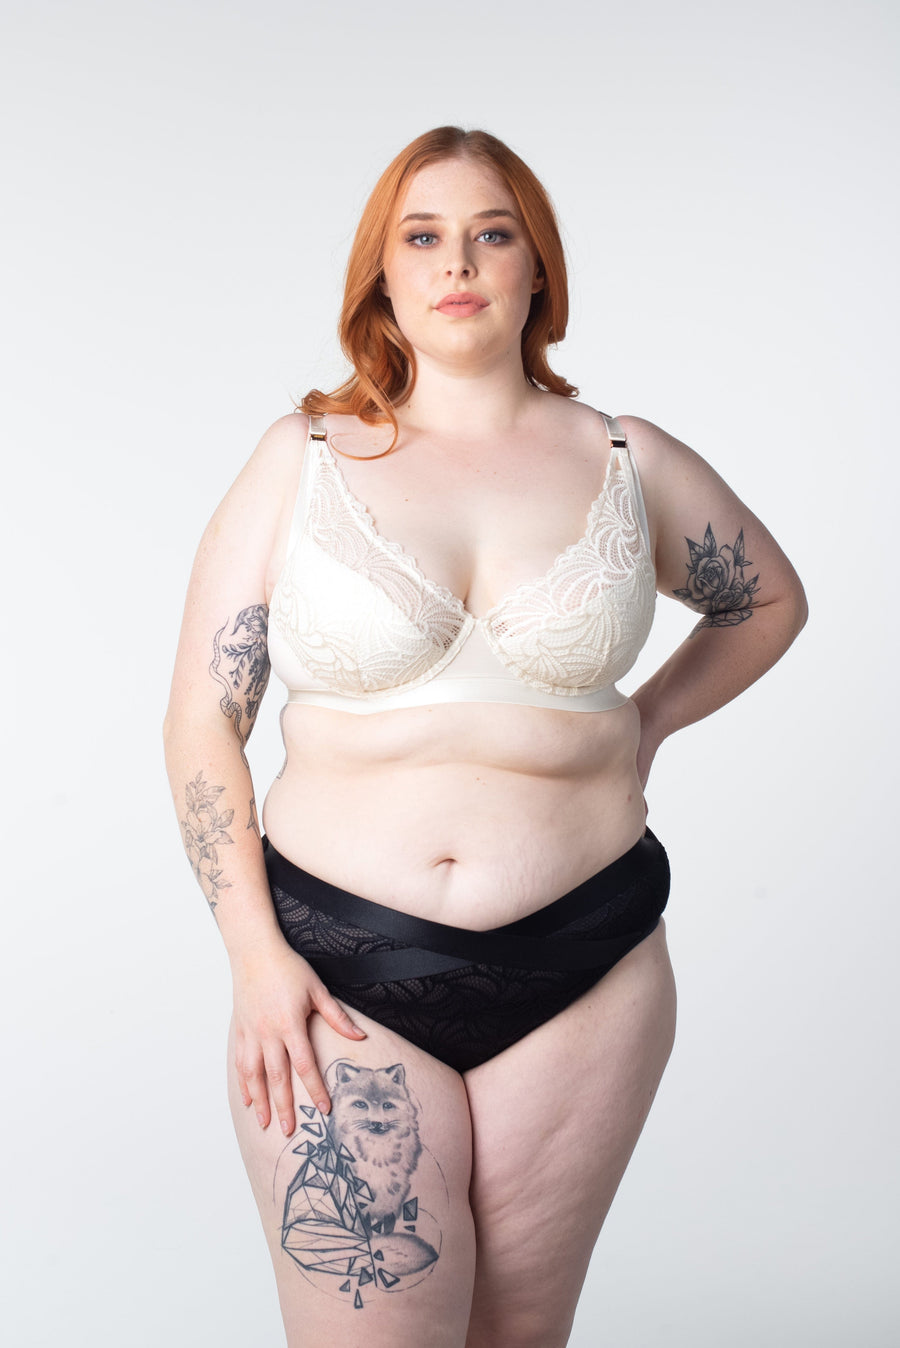 Ali, stunningly shows off the Warrior Plunge Ivory nursing and breastfeeding bra by Hotmilk Lingerie. Featuring an edgy design, graphic lace, and magnetic clips for added flair, this ensemble is elevated by the supportive features of contour cups and flexi underwire, providing both comfort and lift